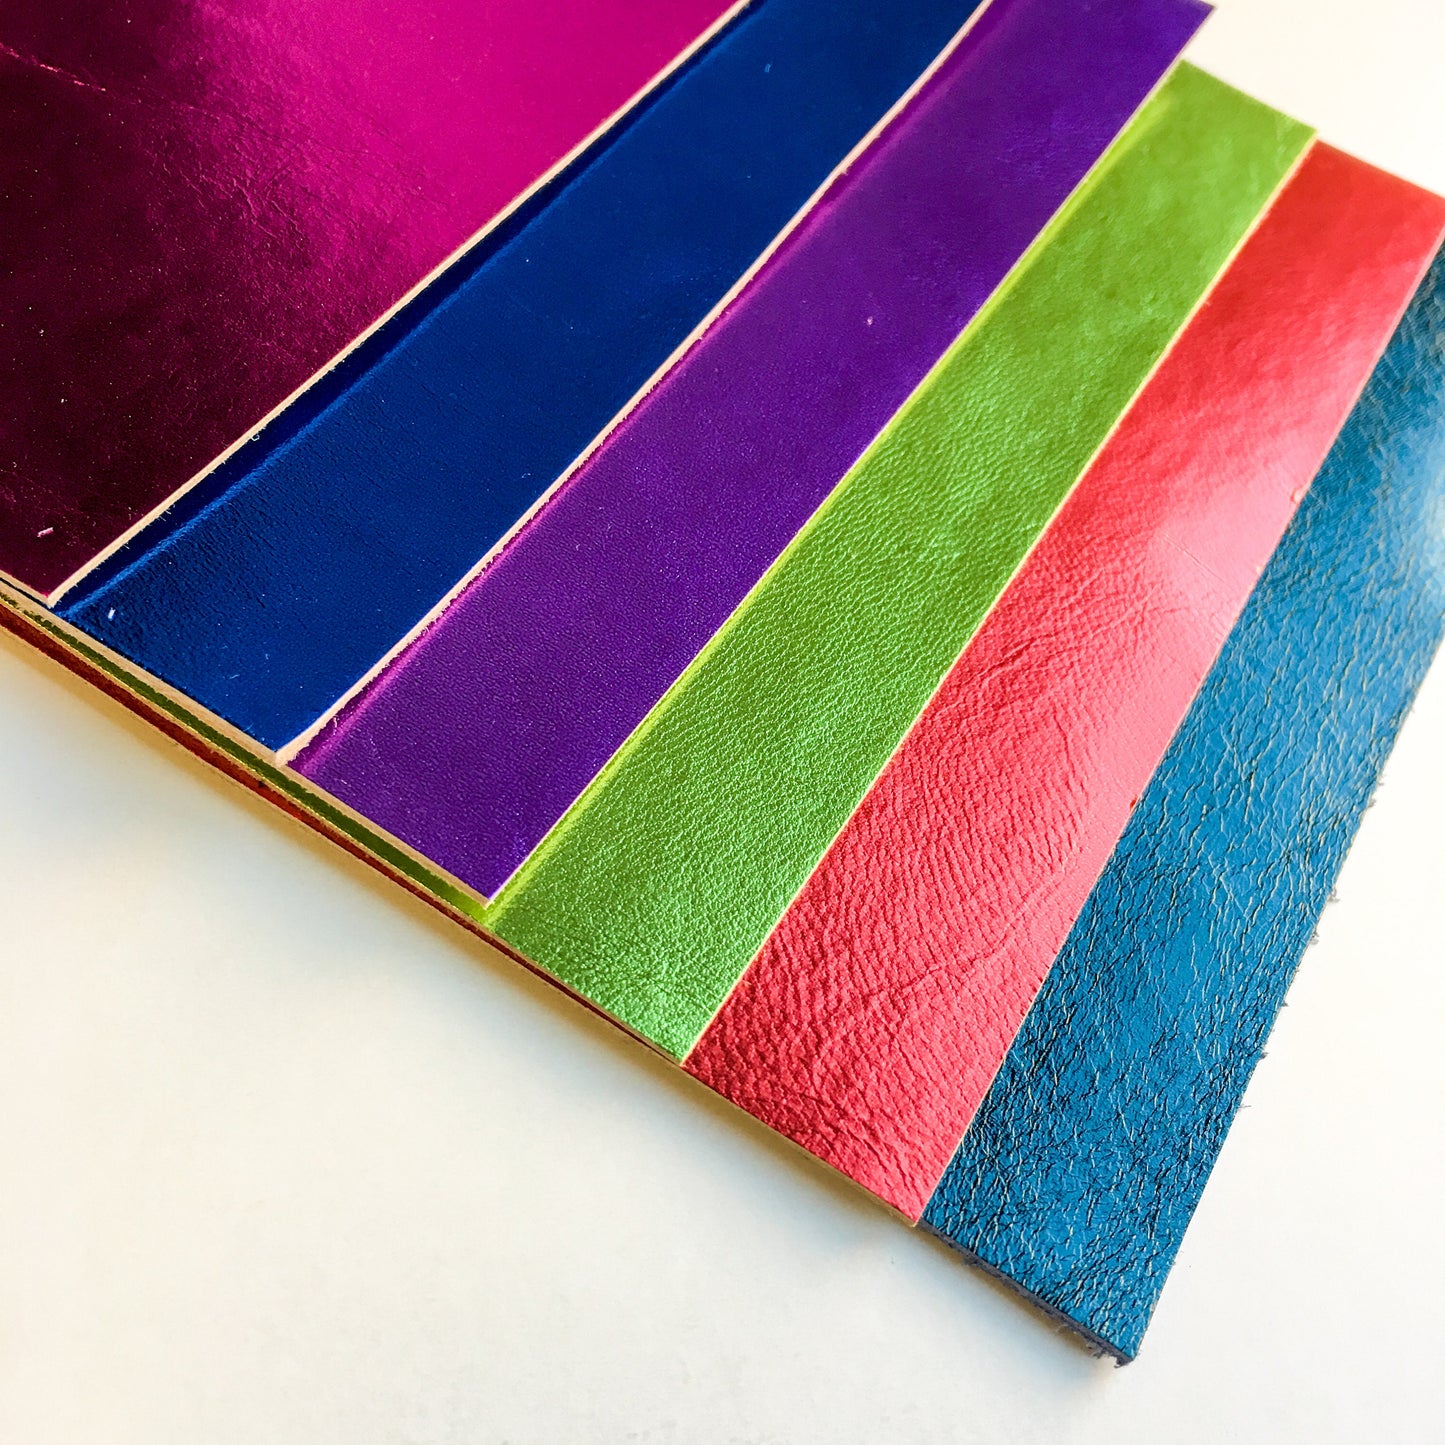 Bright Metallic Leather Mix Set 6 Sheets Of  5x5inch Scraps